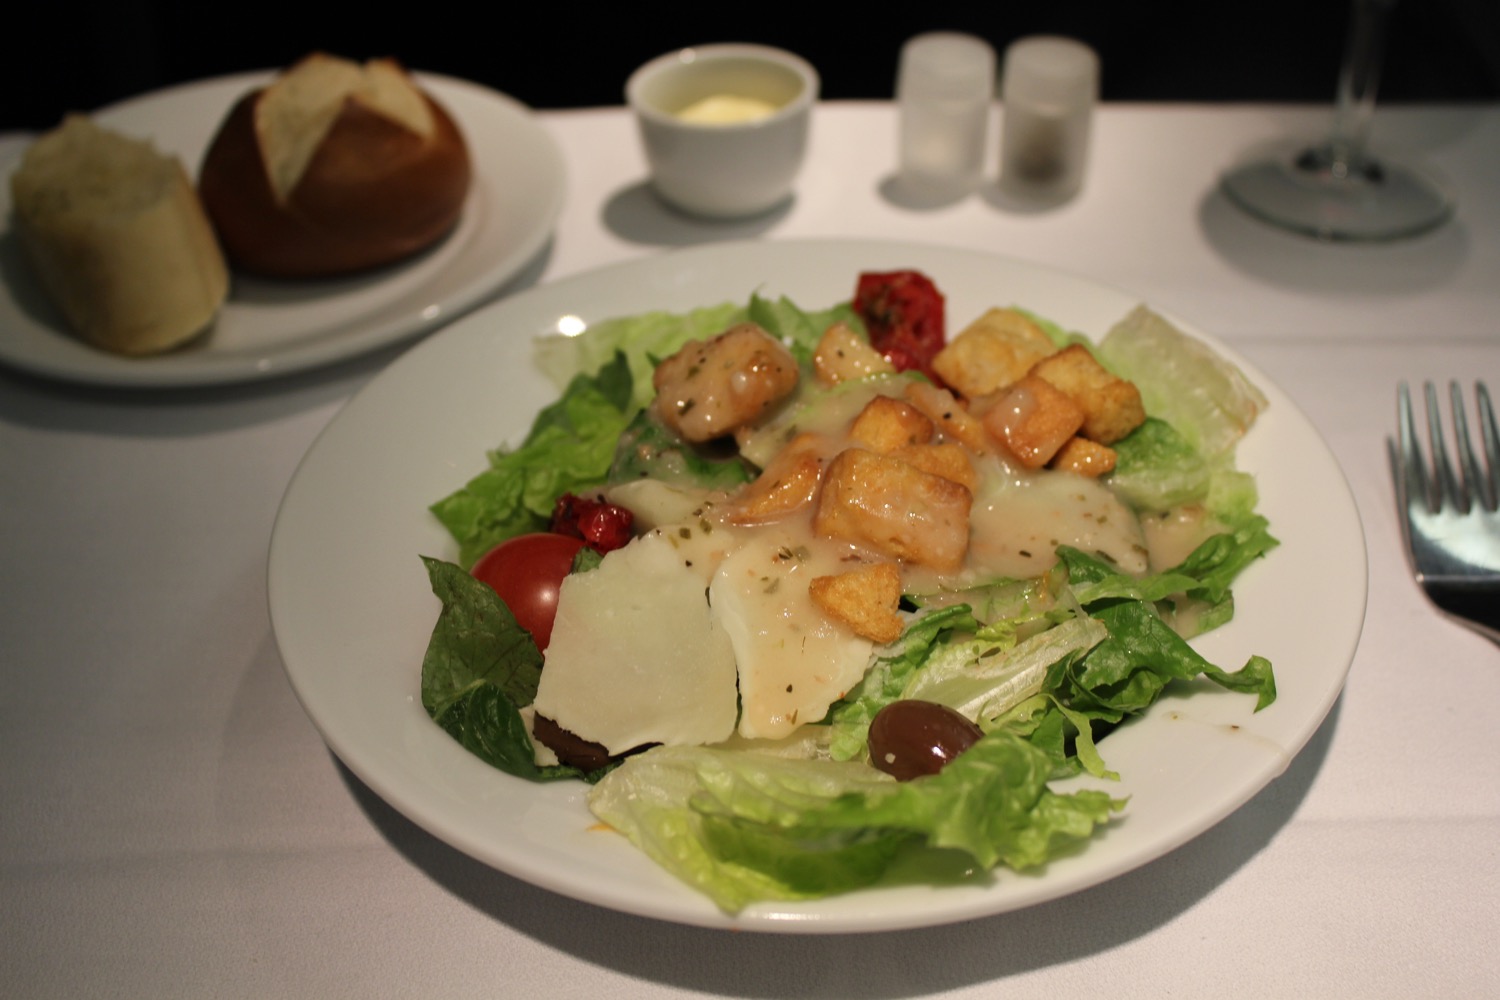 a plate of salad with croutons and cheese